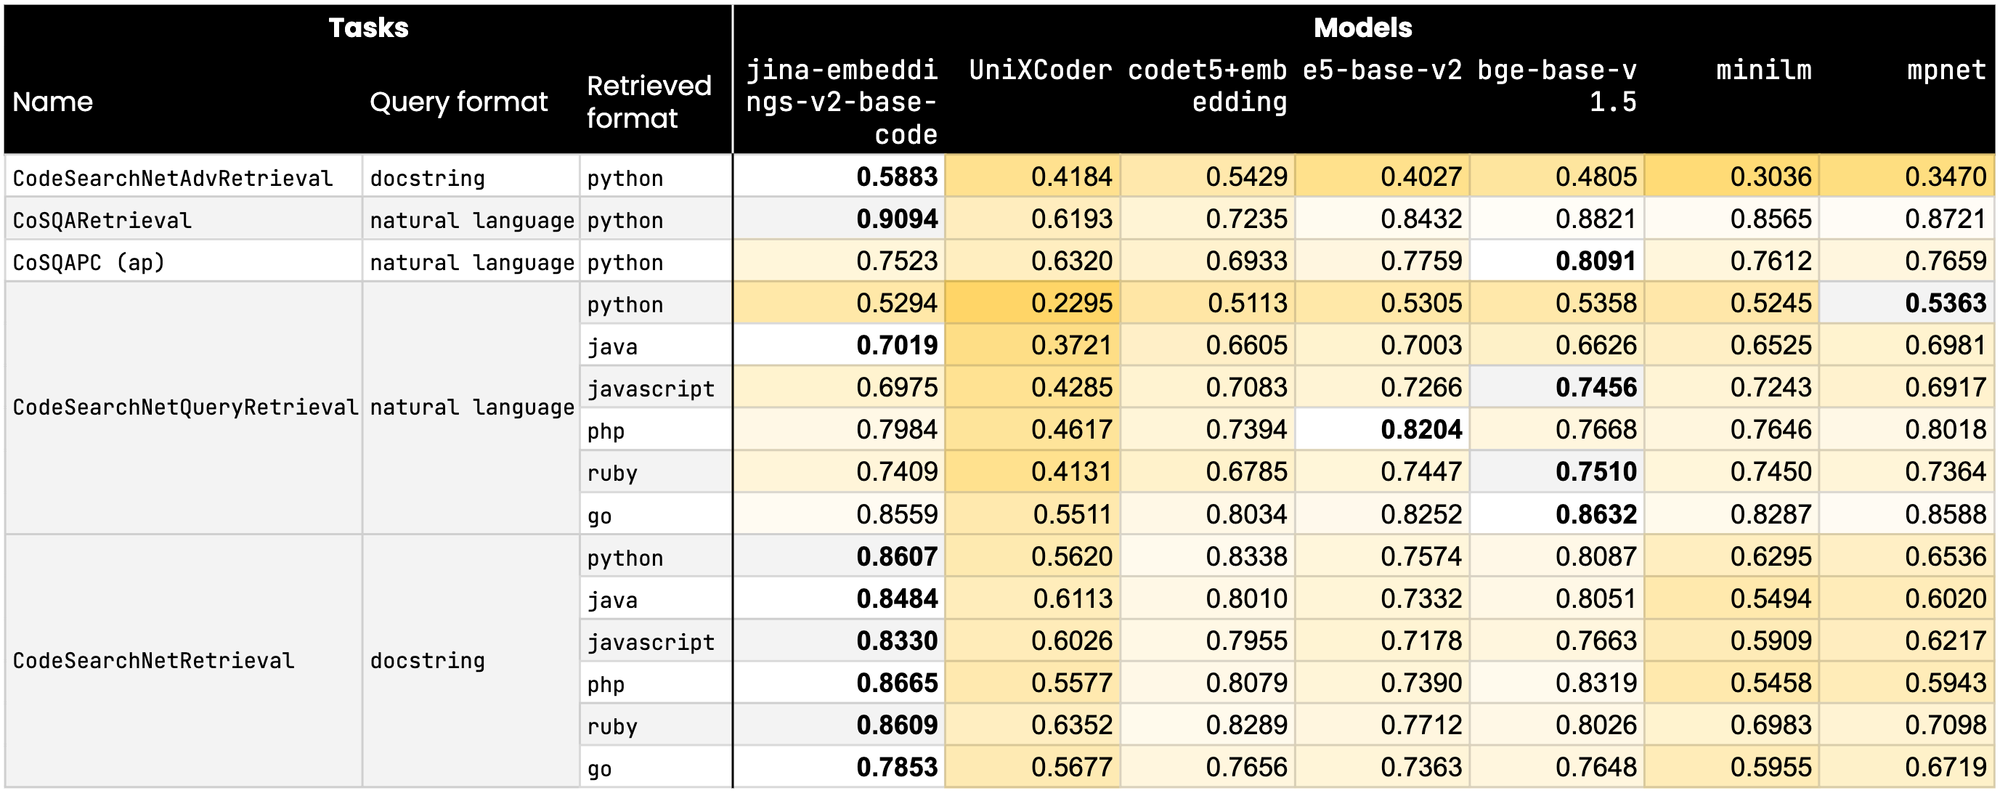 Table of NLP model results comparing performance metrics across multiple programming languages.